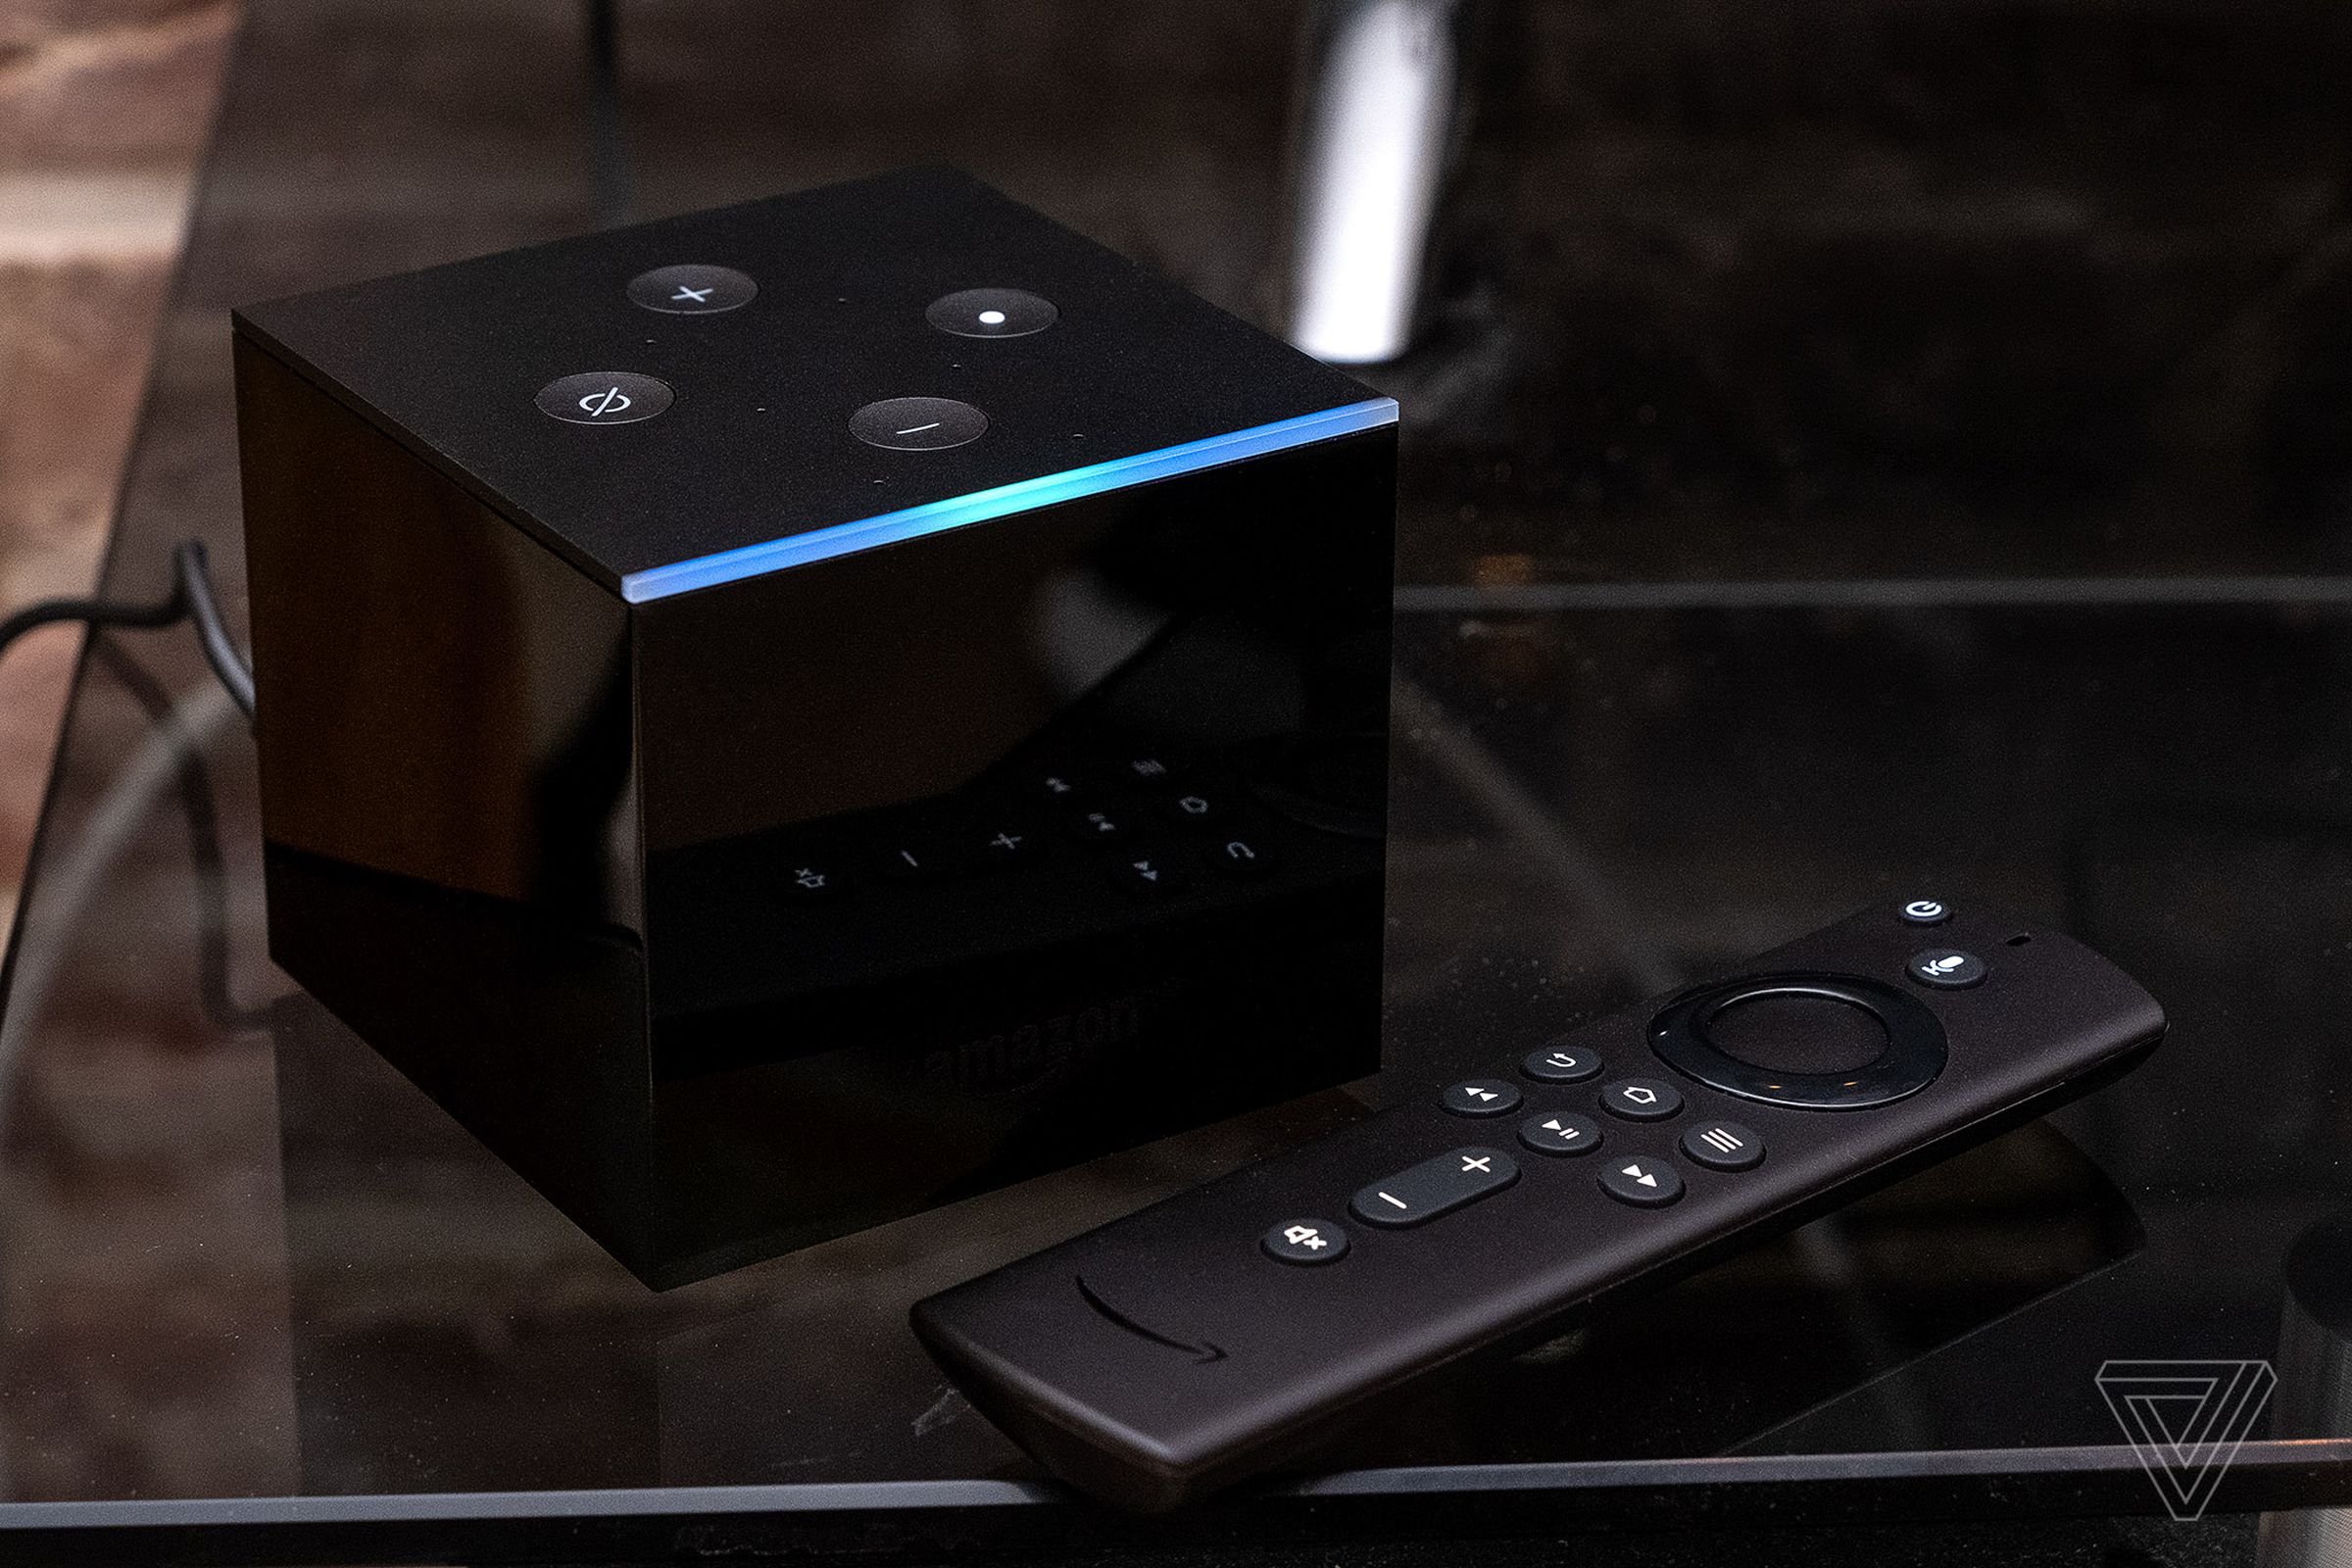 The Fire TV Cube is the most capable of Amazon’s streaming devices, and can act as an Echo speaker and control some home entertainment gear.